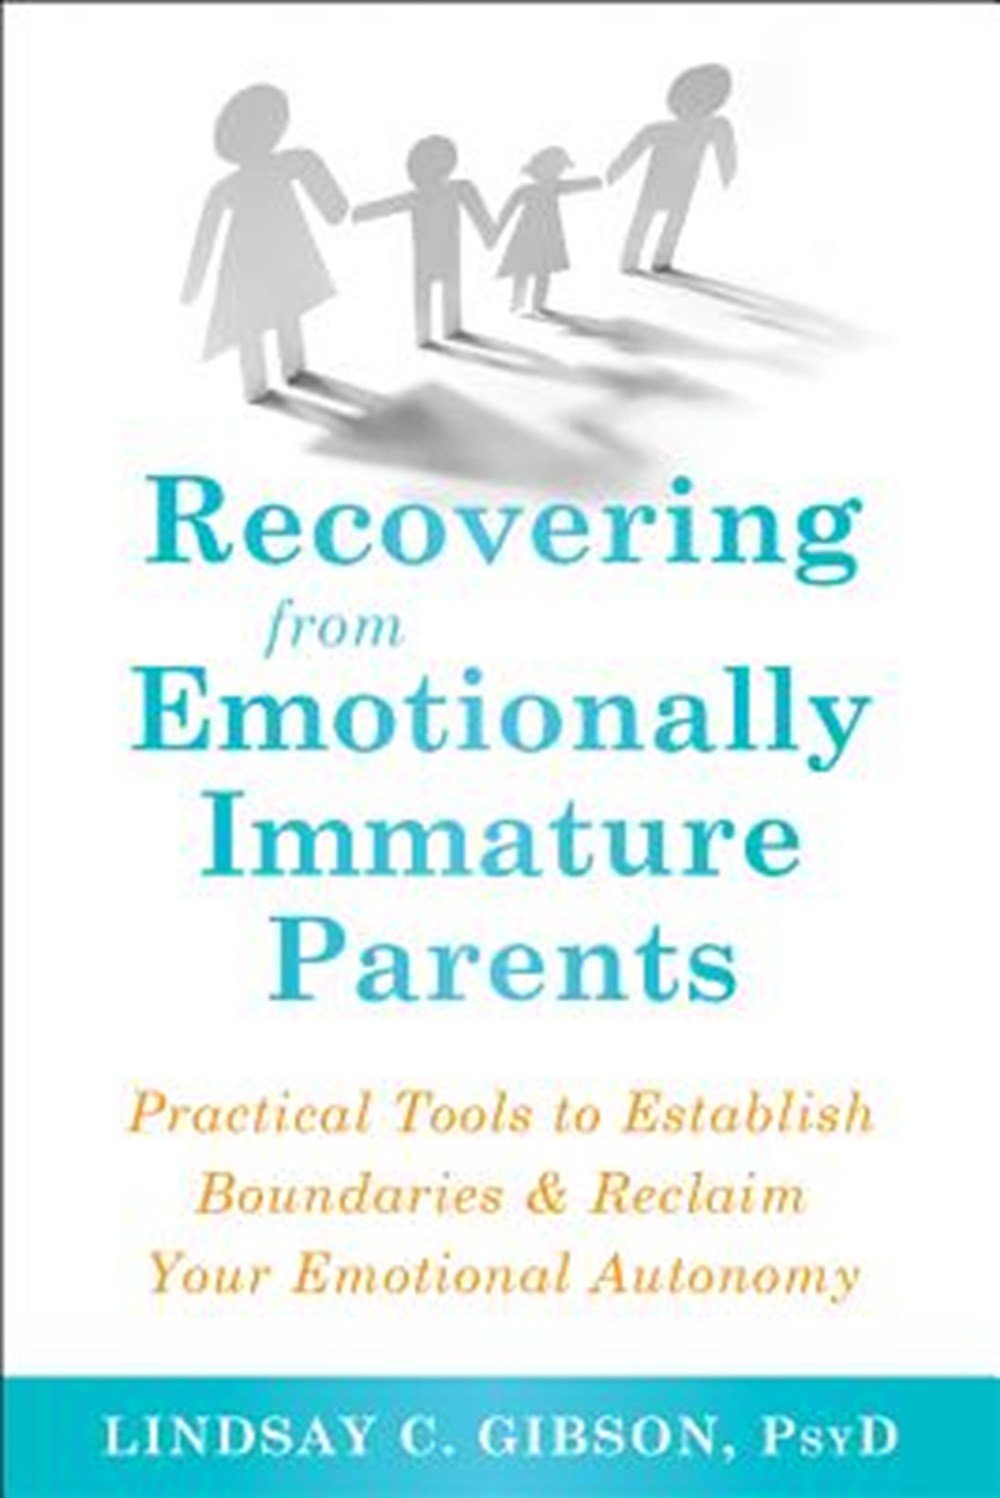 Recovering from Emotionally Immature Parents // Practical Tools to Establish Boundaries and Reclaim Your Emotional Autonomy